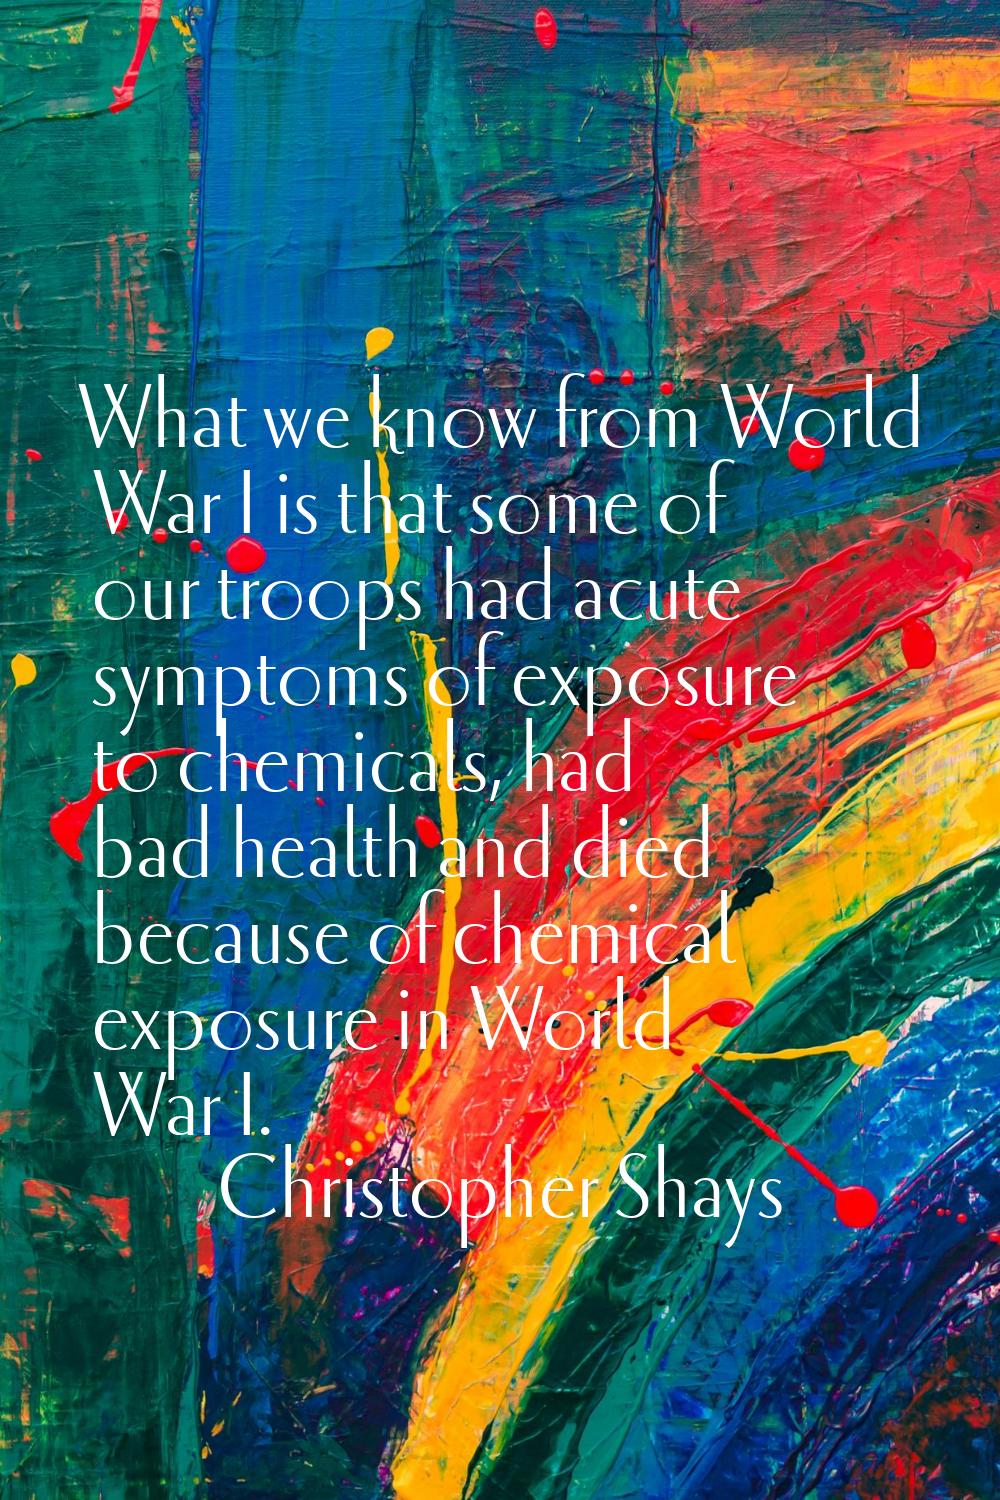 What we know from World War I is that some of our troops had acute symptoms of exposure to chemical